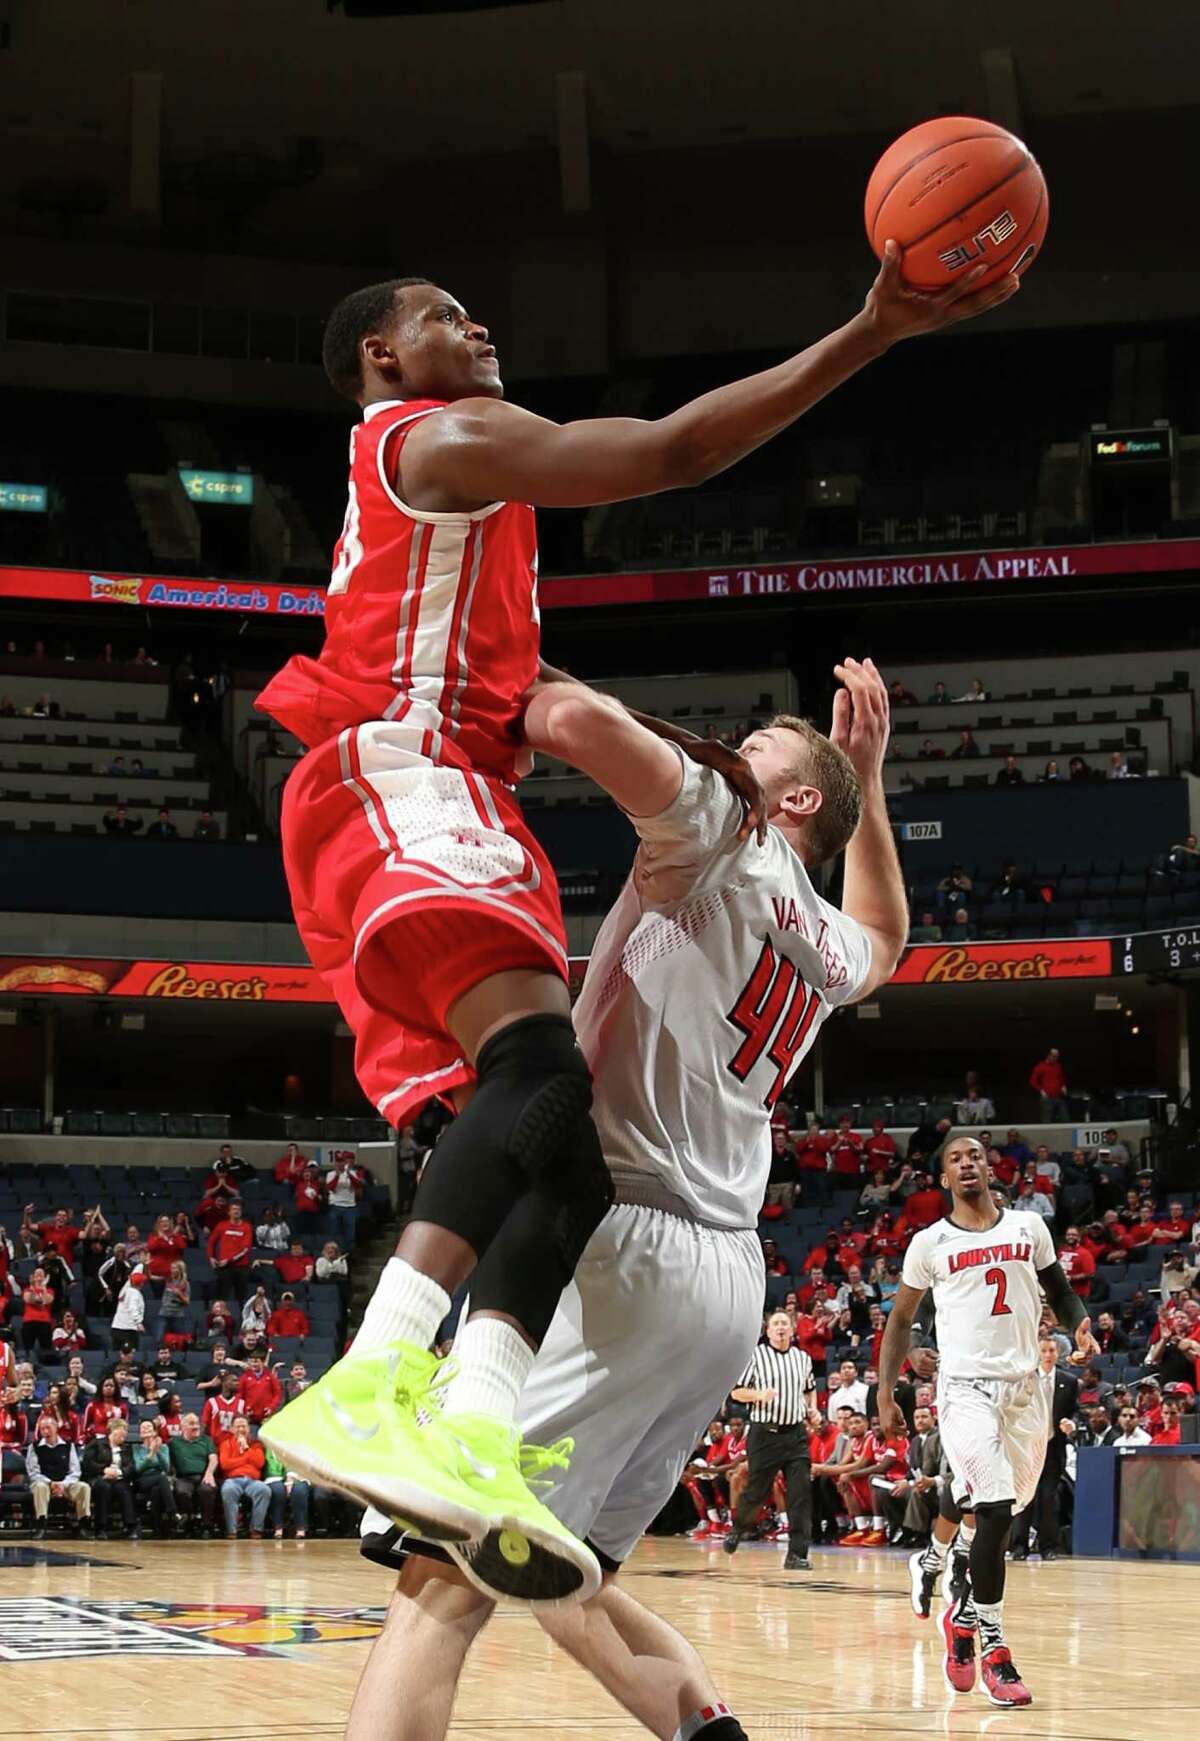 MEMPHIS, TN - MARCH 14: Danuel House #23 of the Houston Cougars drives to the basket against Stephan Van Treese #44 of the Louisville Cardinals during the semifinals of the American Athletic Conference Tournament at FedExForum on March 14, 2014 in Memphis, Tennessee.